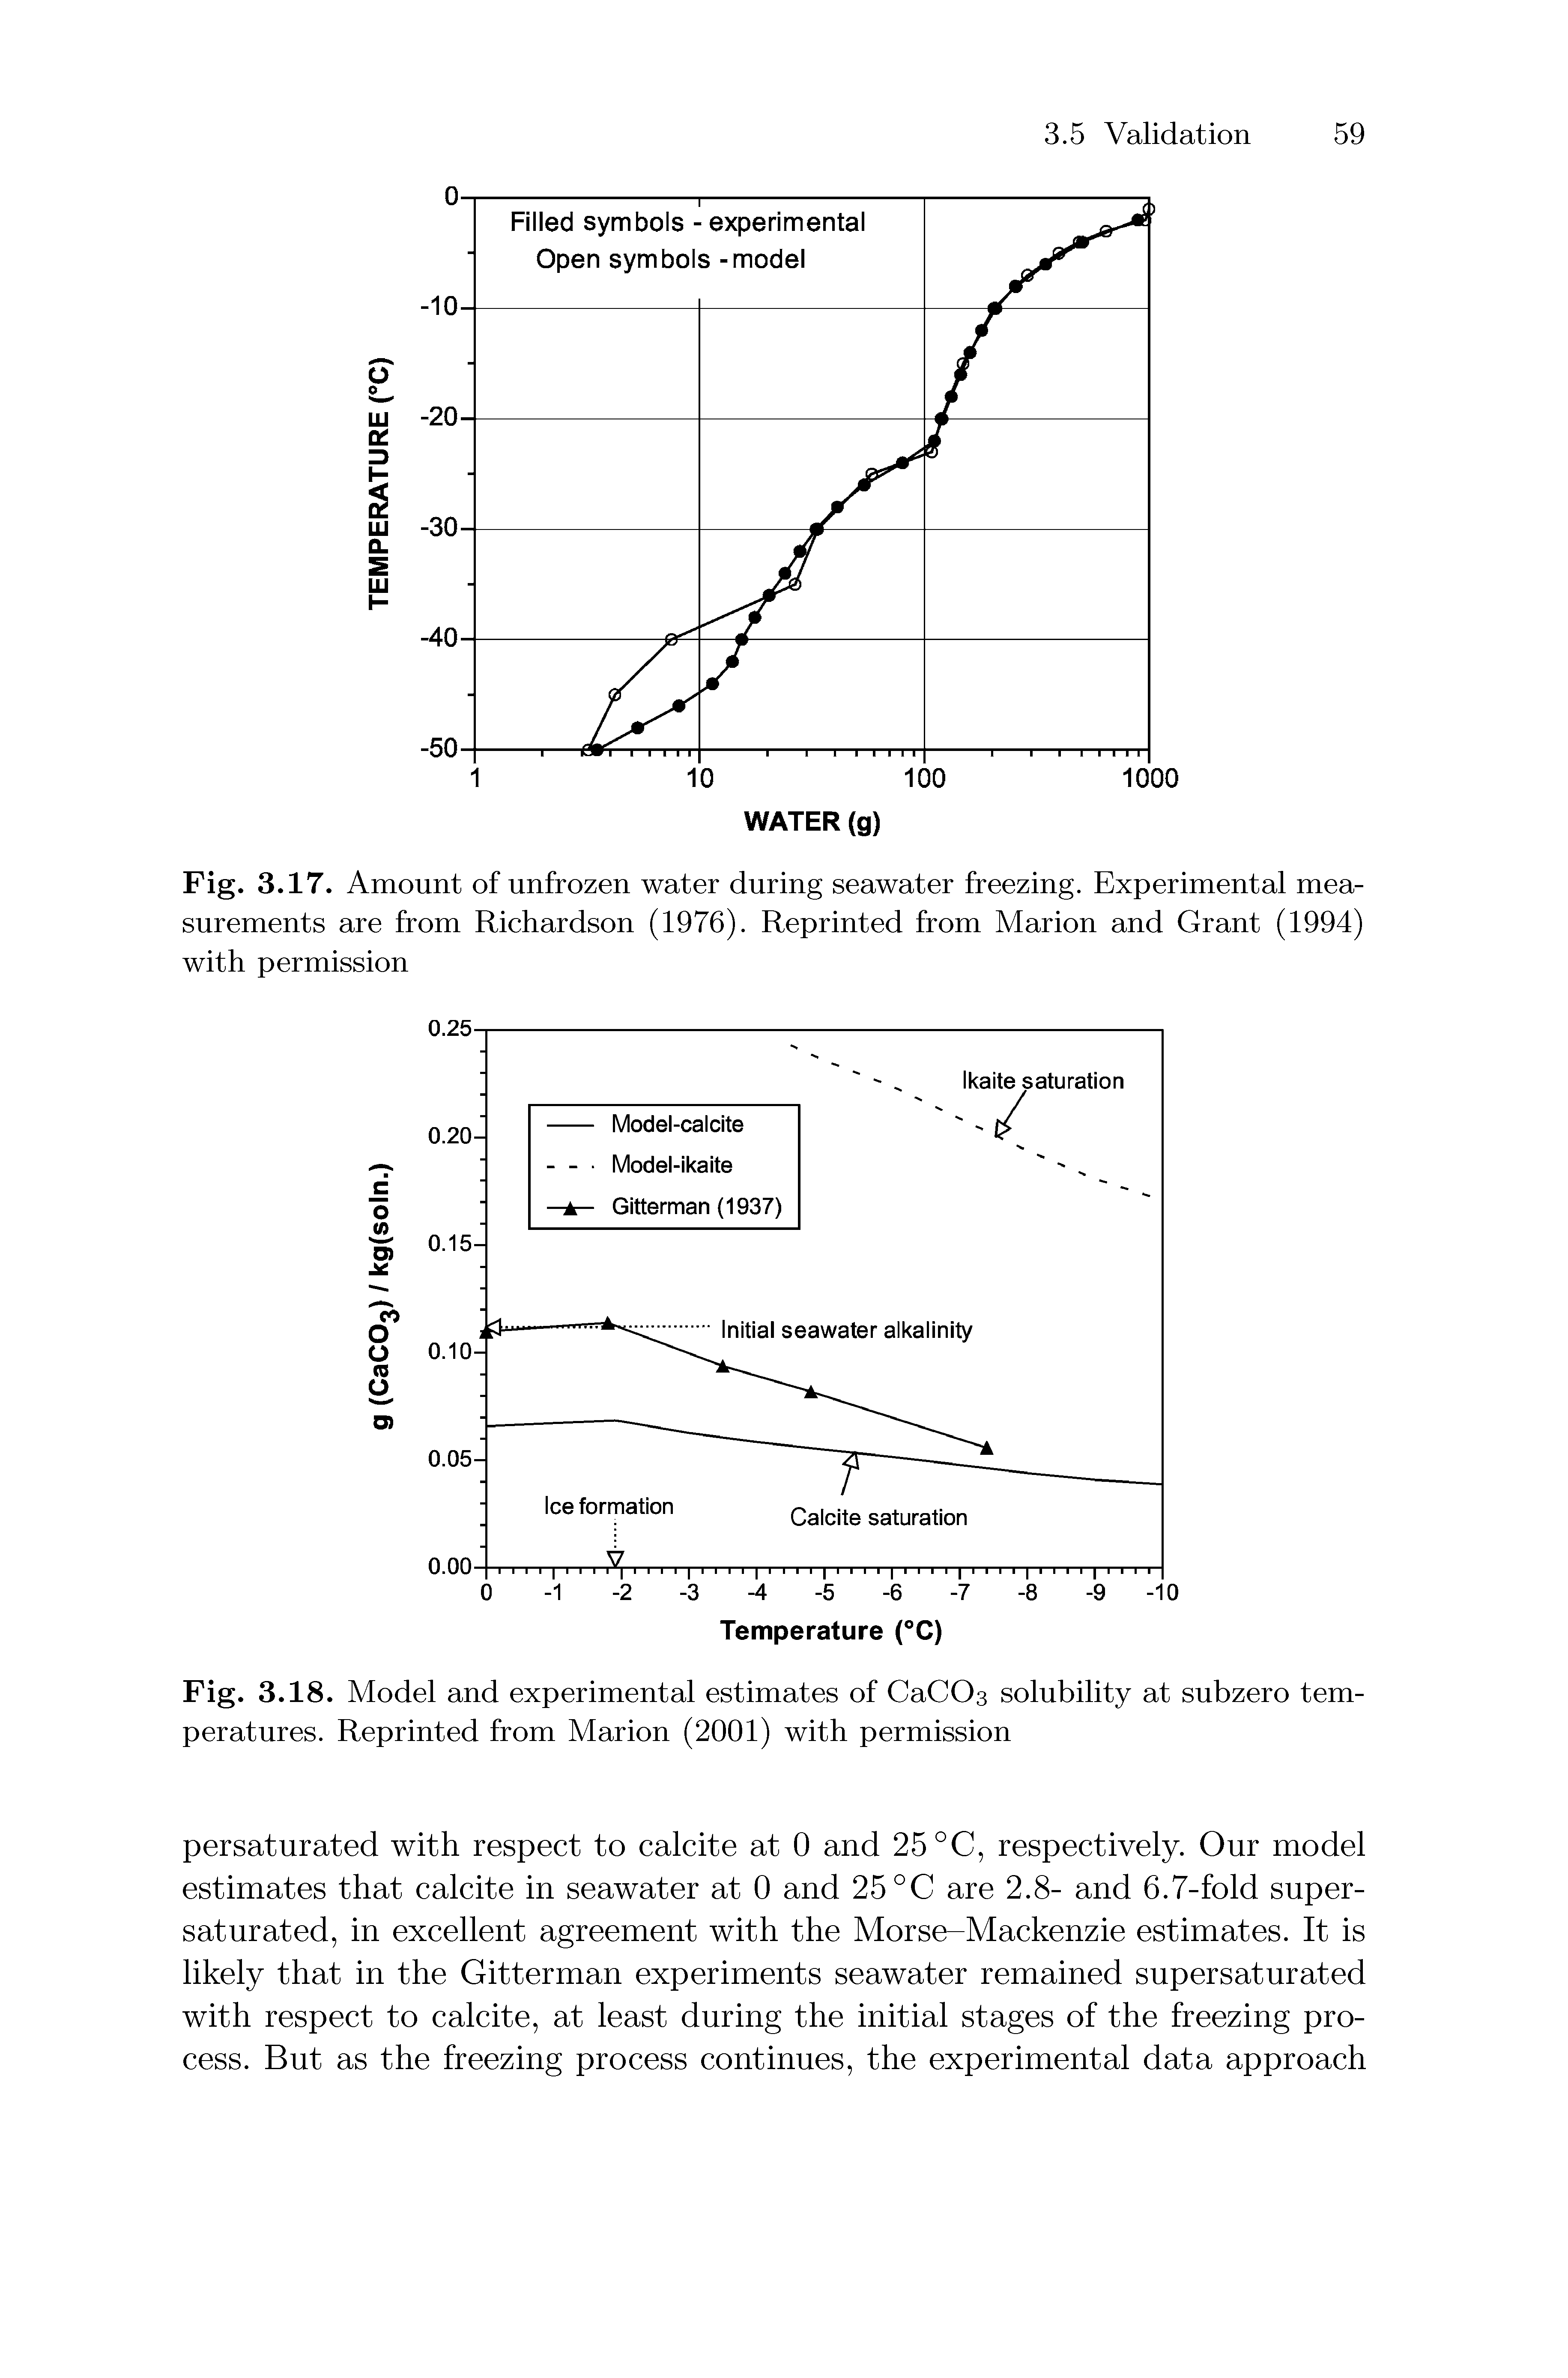 Fig. 3.17. Amount of unfrozen water during seawater freezing. Experimental measurements are from Richardson (1976). Reprinted from Marion and Grant (1994) with permission...